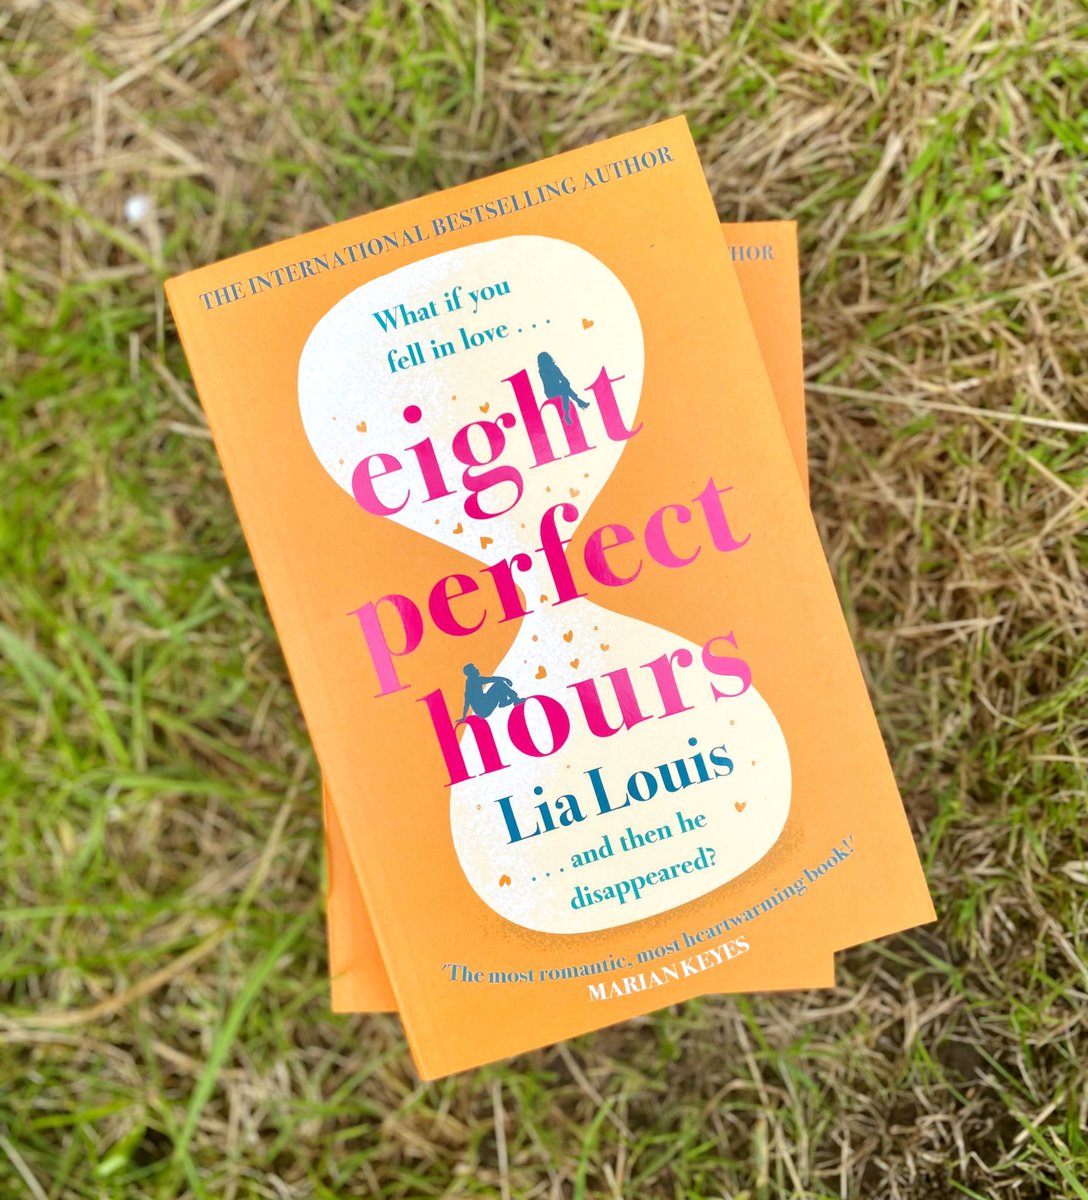 🧡 To celebrate the total swoonyness of my finished author copies of #EightPerfectHours arriving, I’m giving away TWO SIGNED COPIES! To enter, all you have to do is RT this tweet and make sure you’re following! I’ll pick 2 people on 1/8! Good luck! 🎉🎉🎉